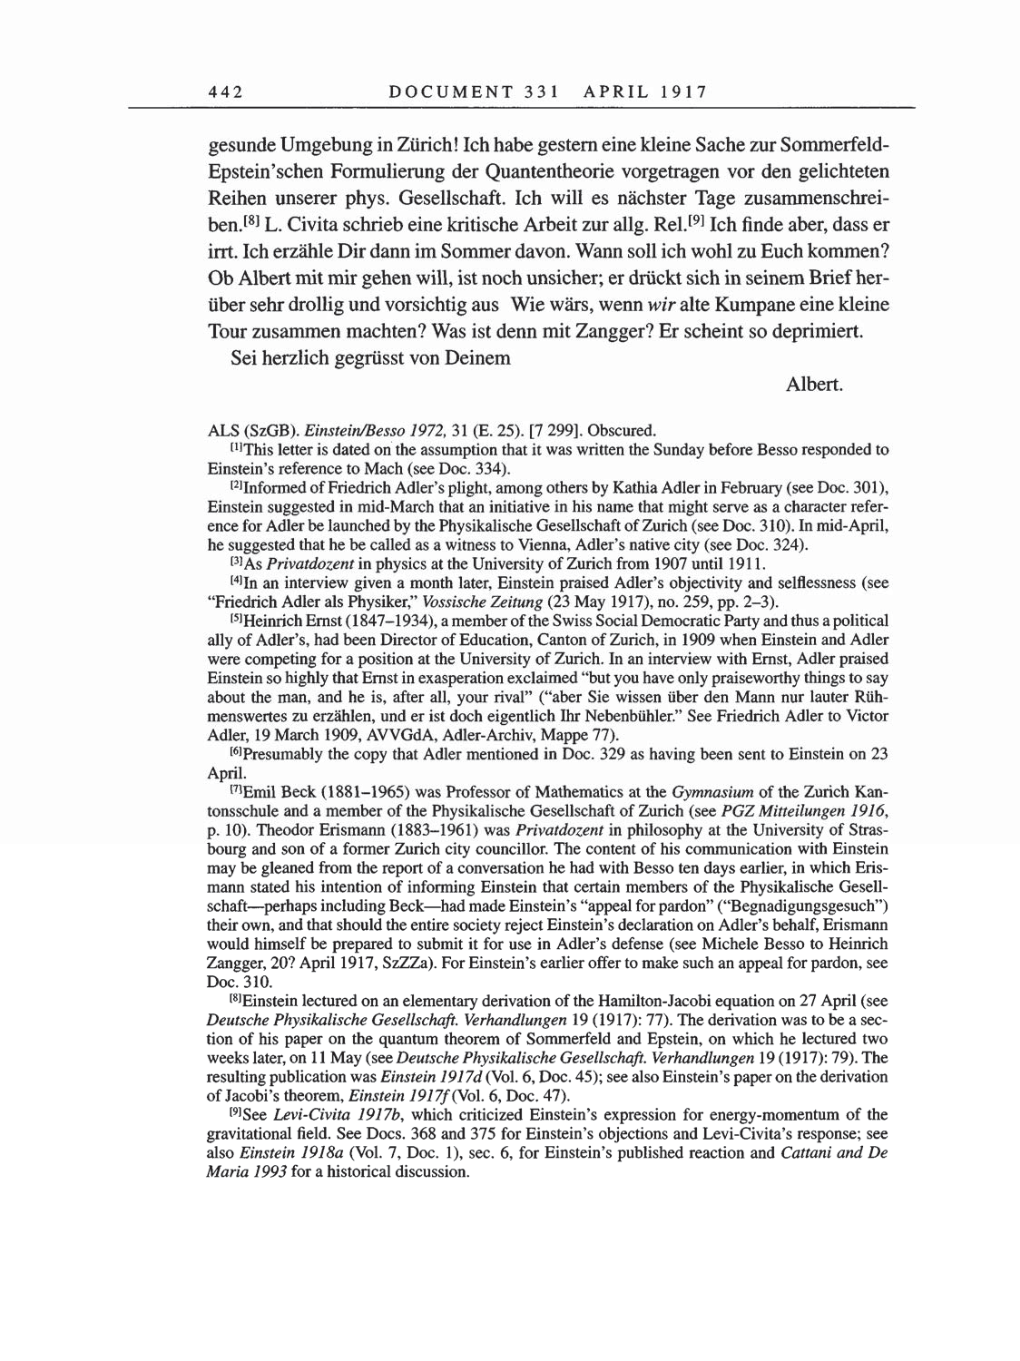 Volume 8, Part A: The Berlin Years: Correspondence 1914-1917 page 442